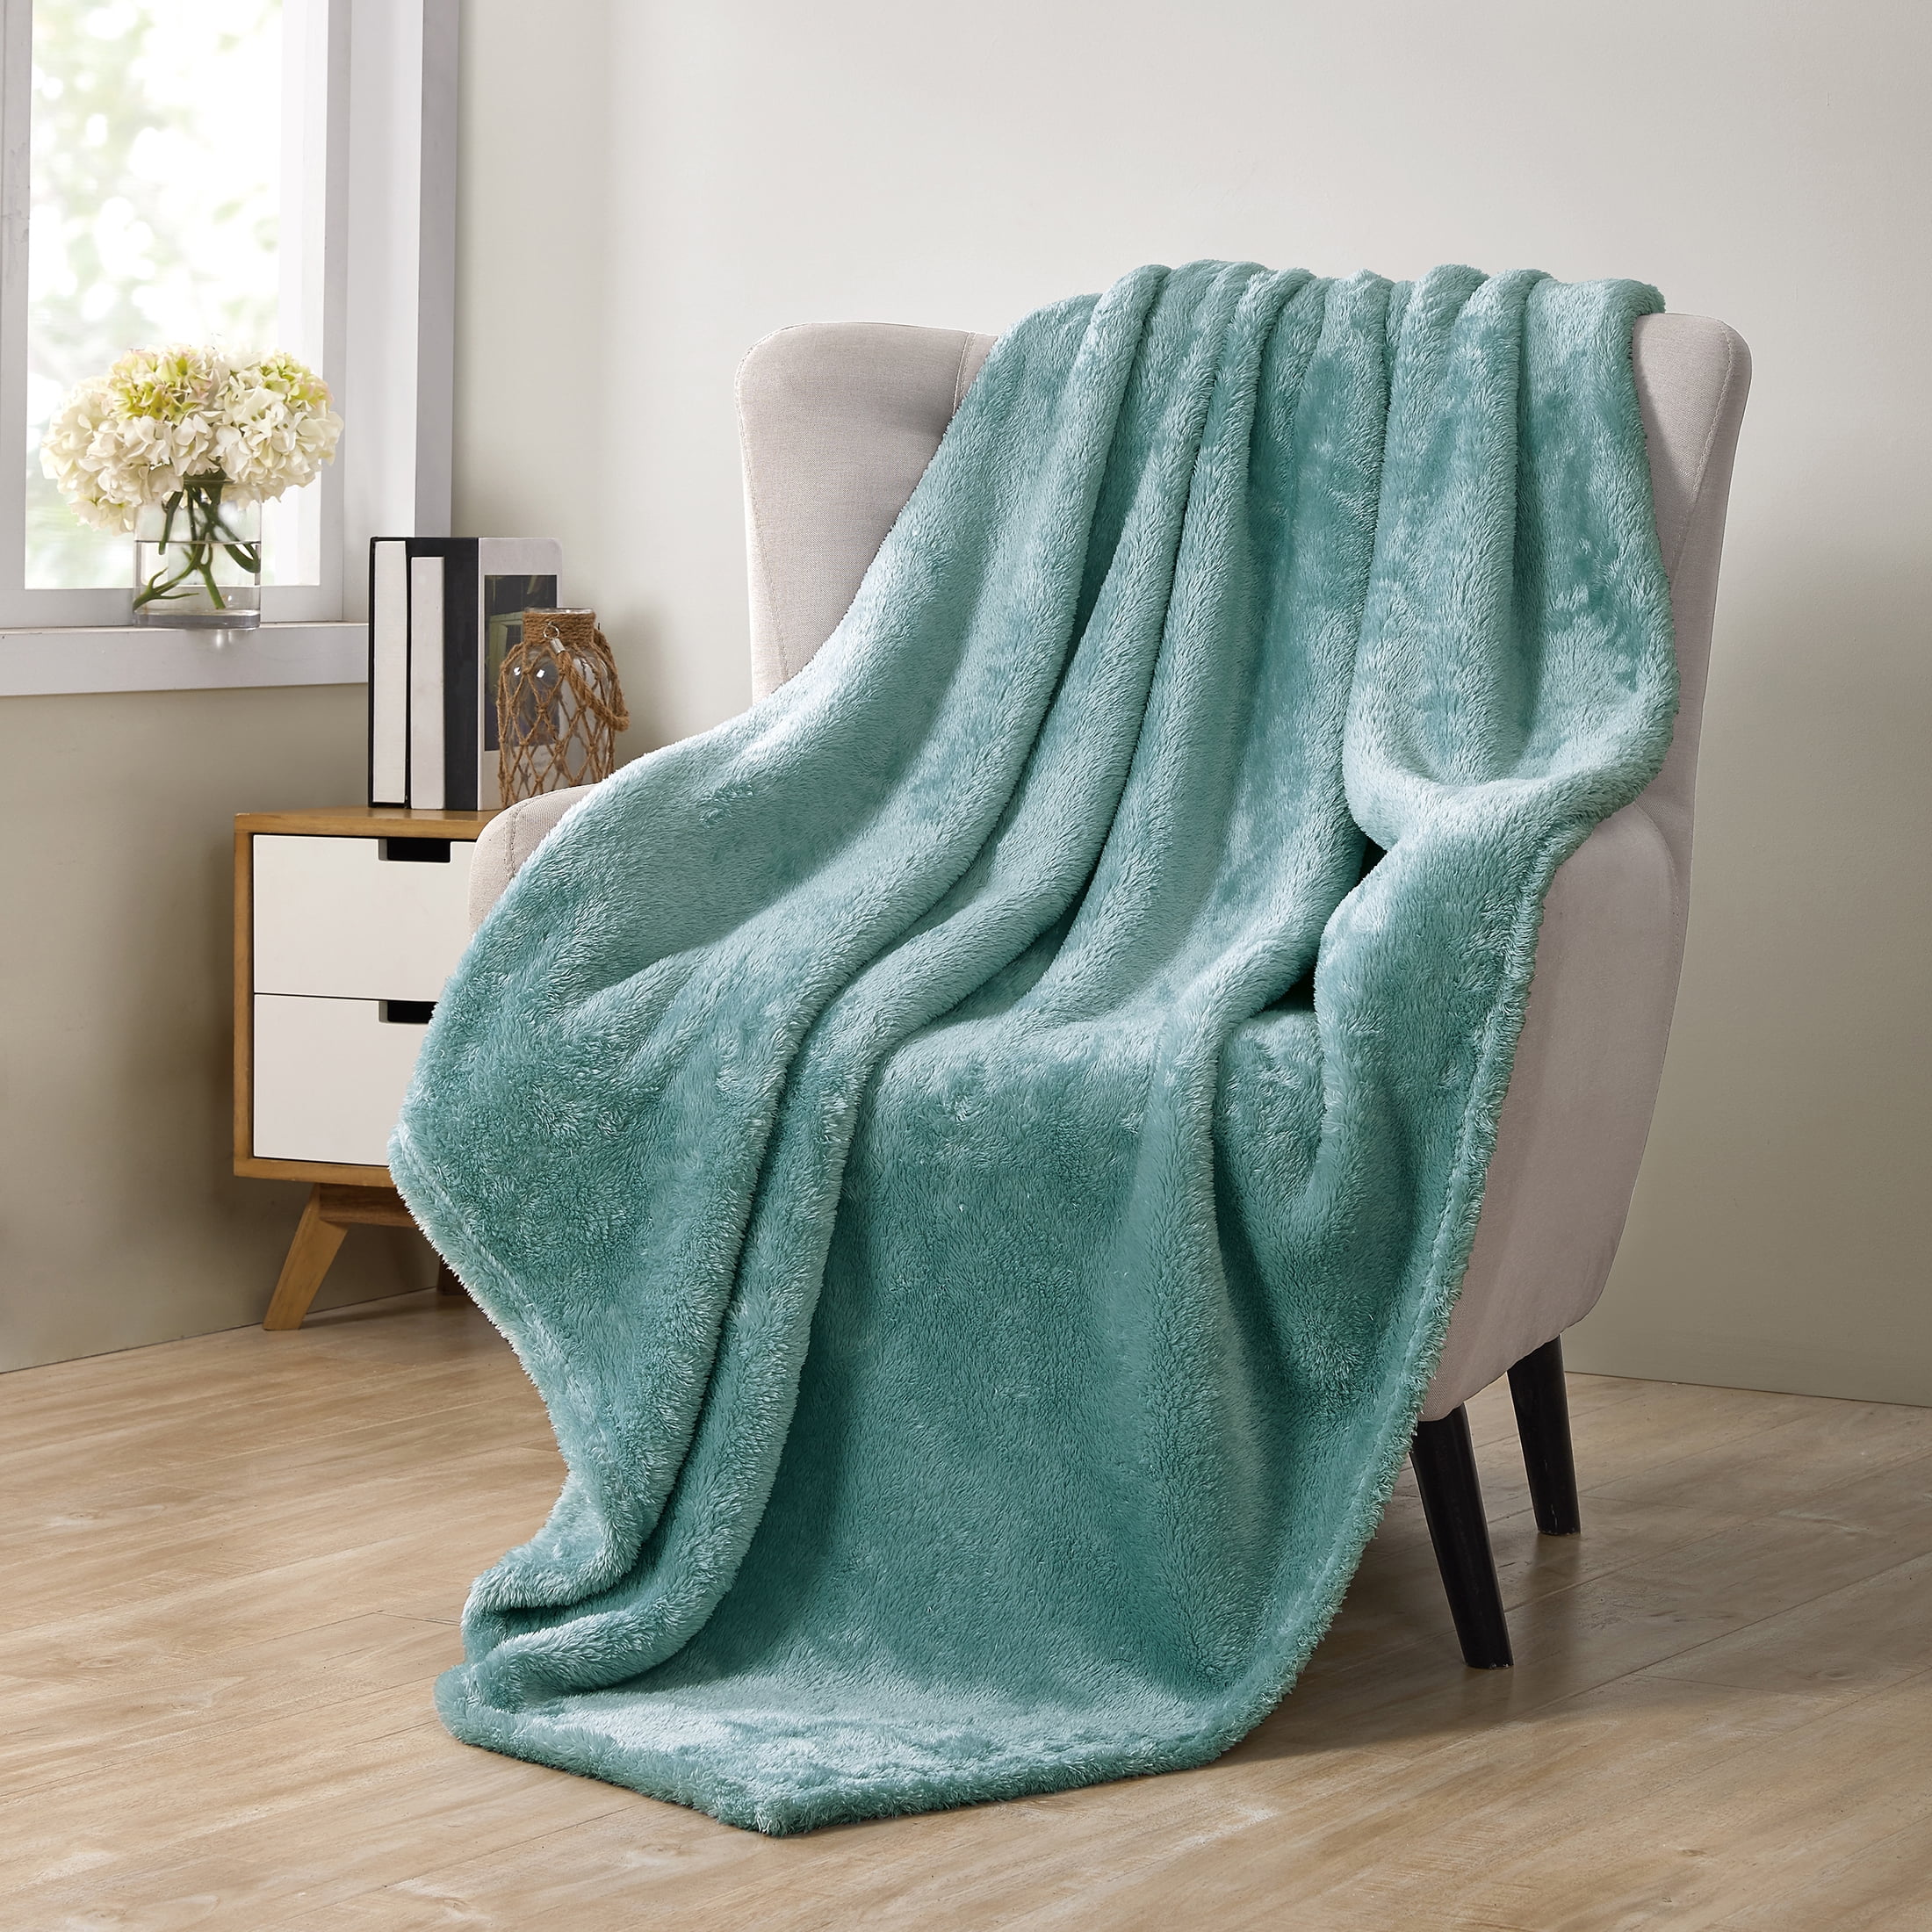 Charcoal Sparkle Foil Printed Supersoft Plush Throw Fleece Blanket Living Room 